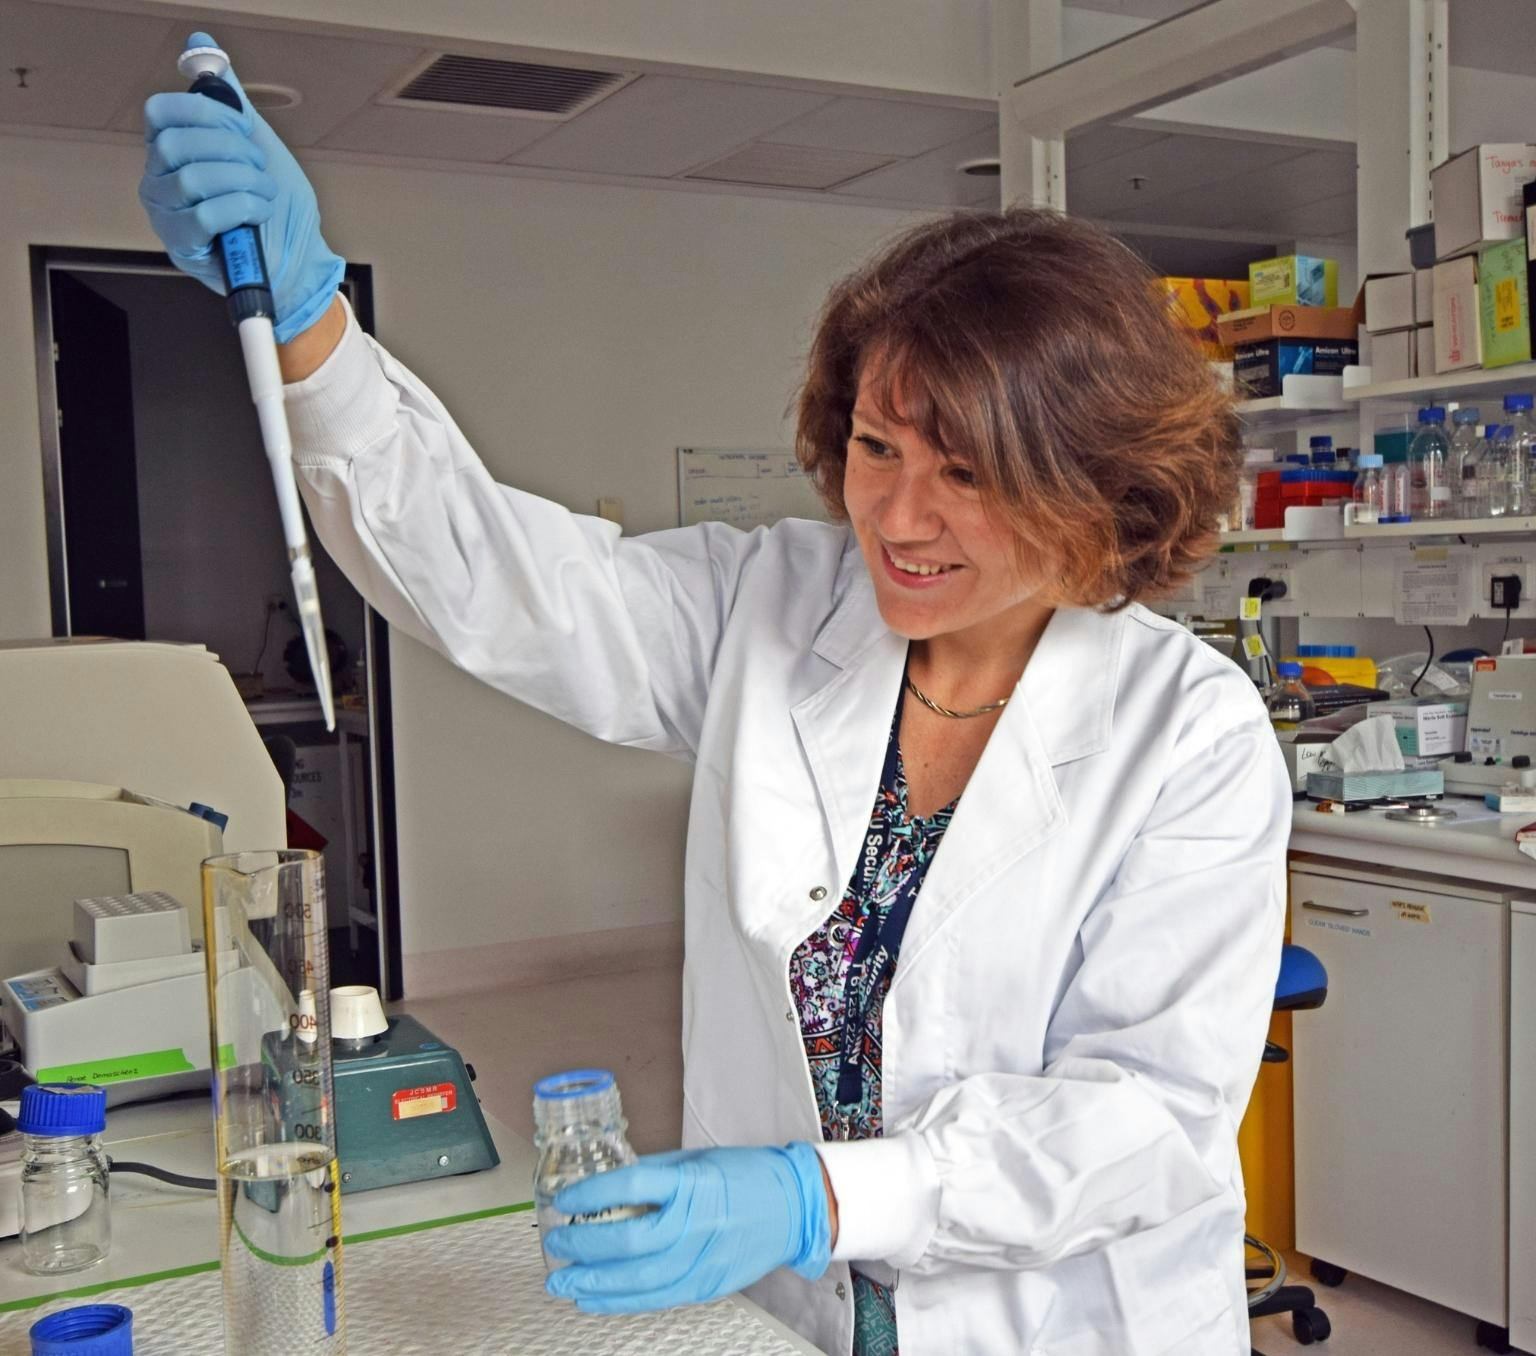 Tanya is holding a long pipette tube and dropping liquid into a measuring cylinder. She is wearing a white lab coat and standing in a laboratory.